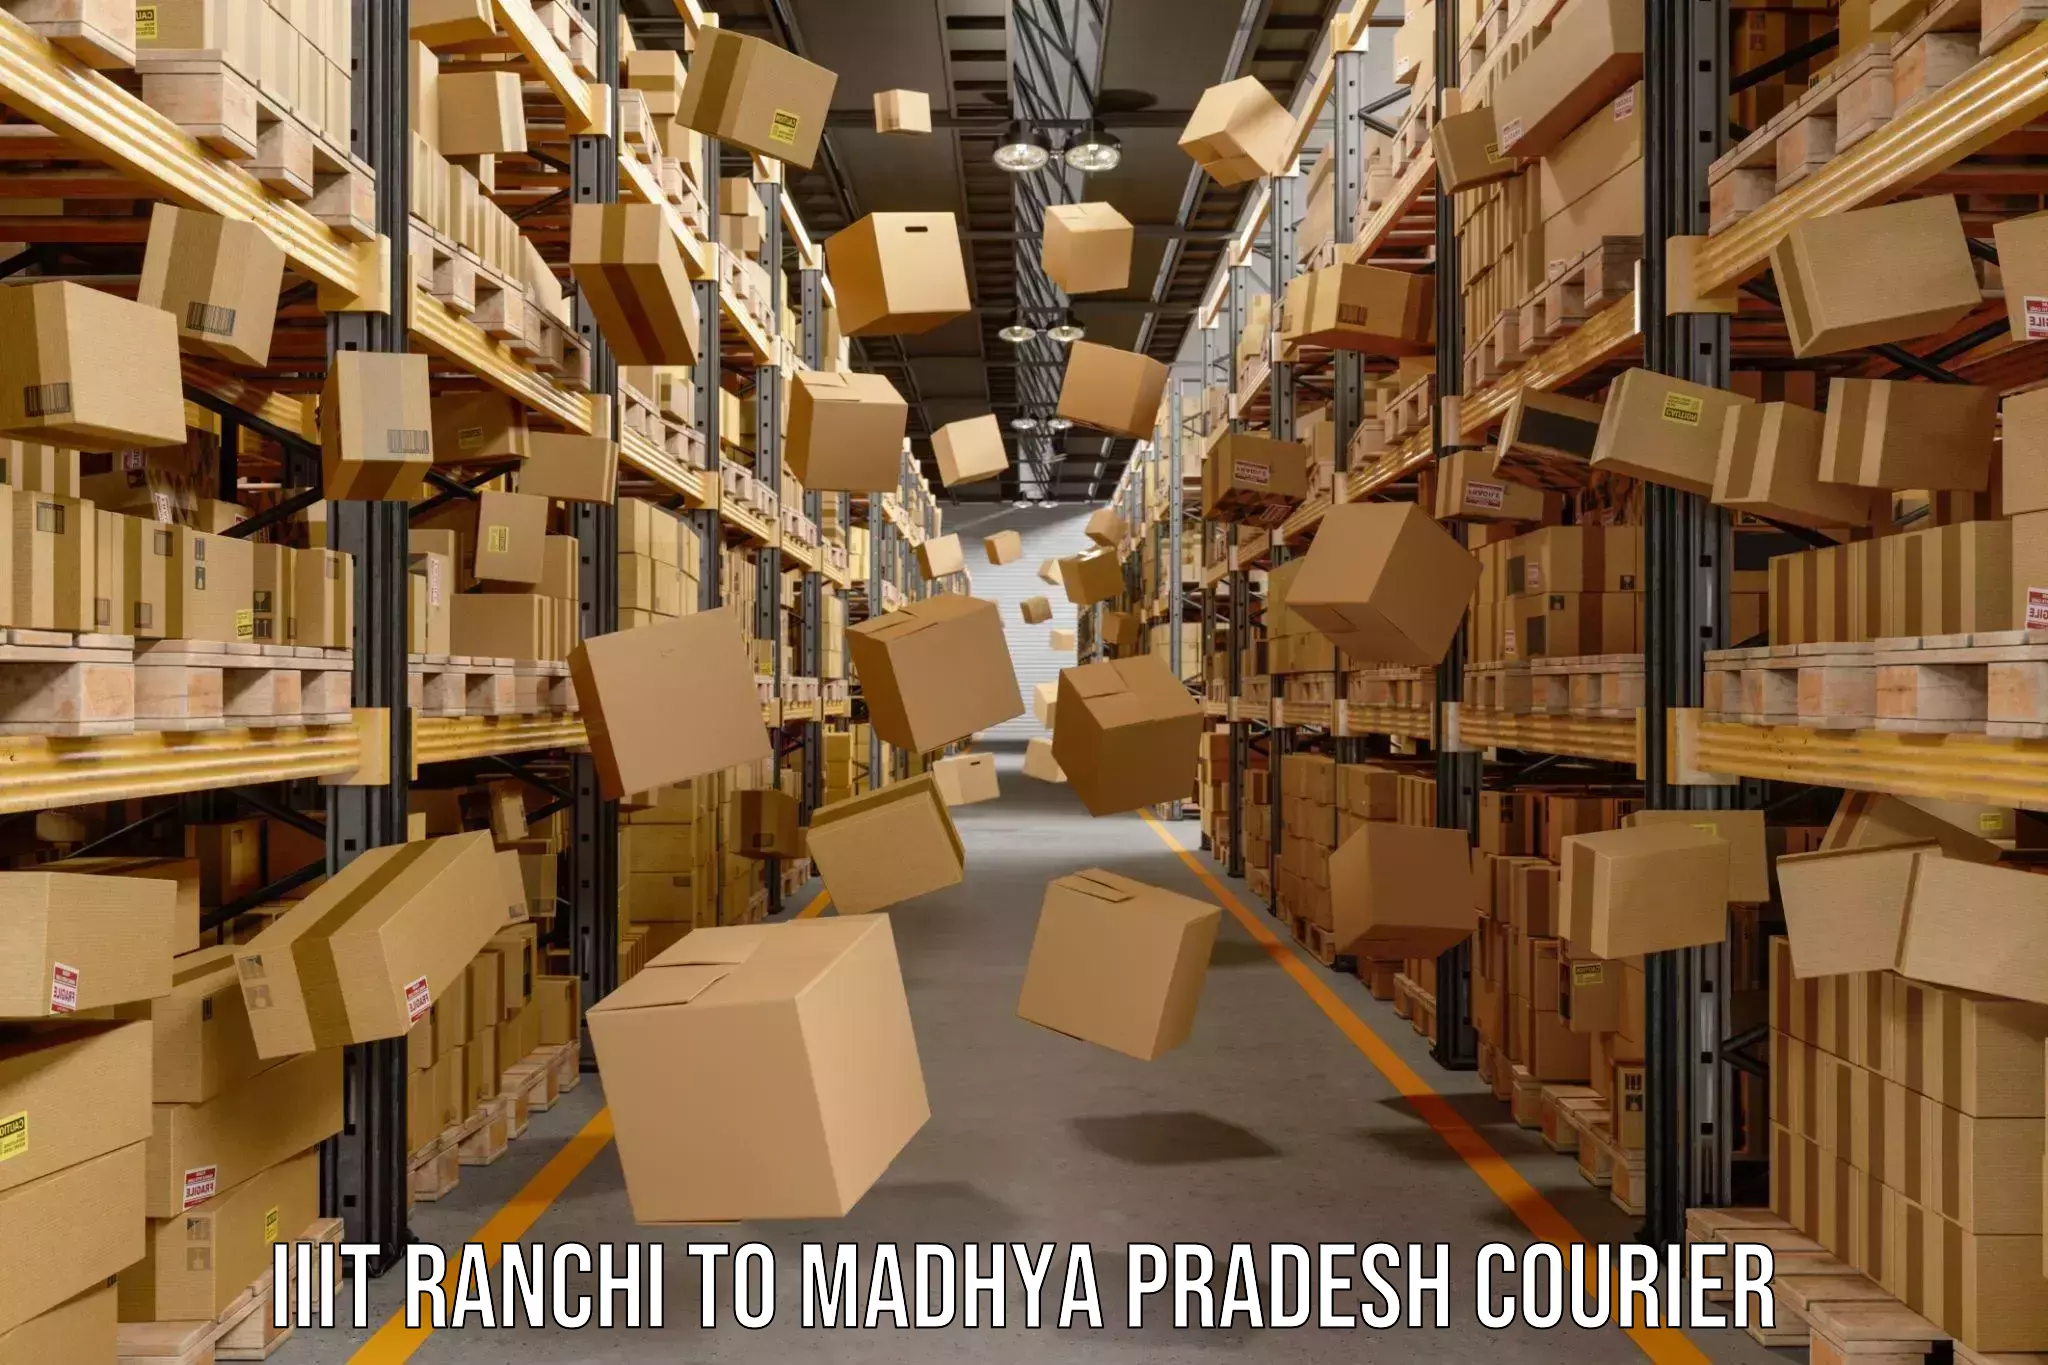 Reliable courier service IIIT Ranchi to Madhya Pradesh